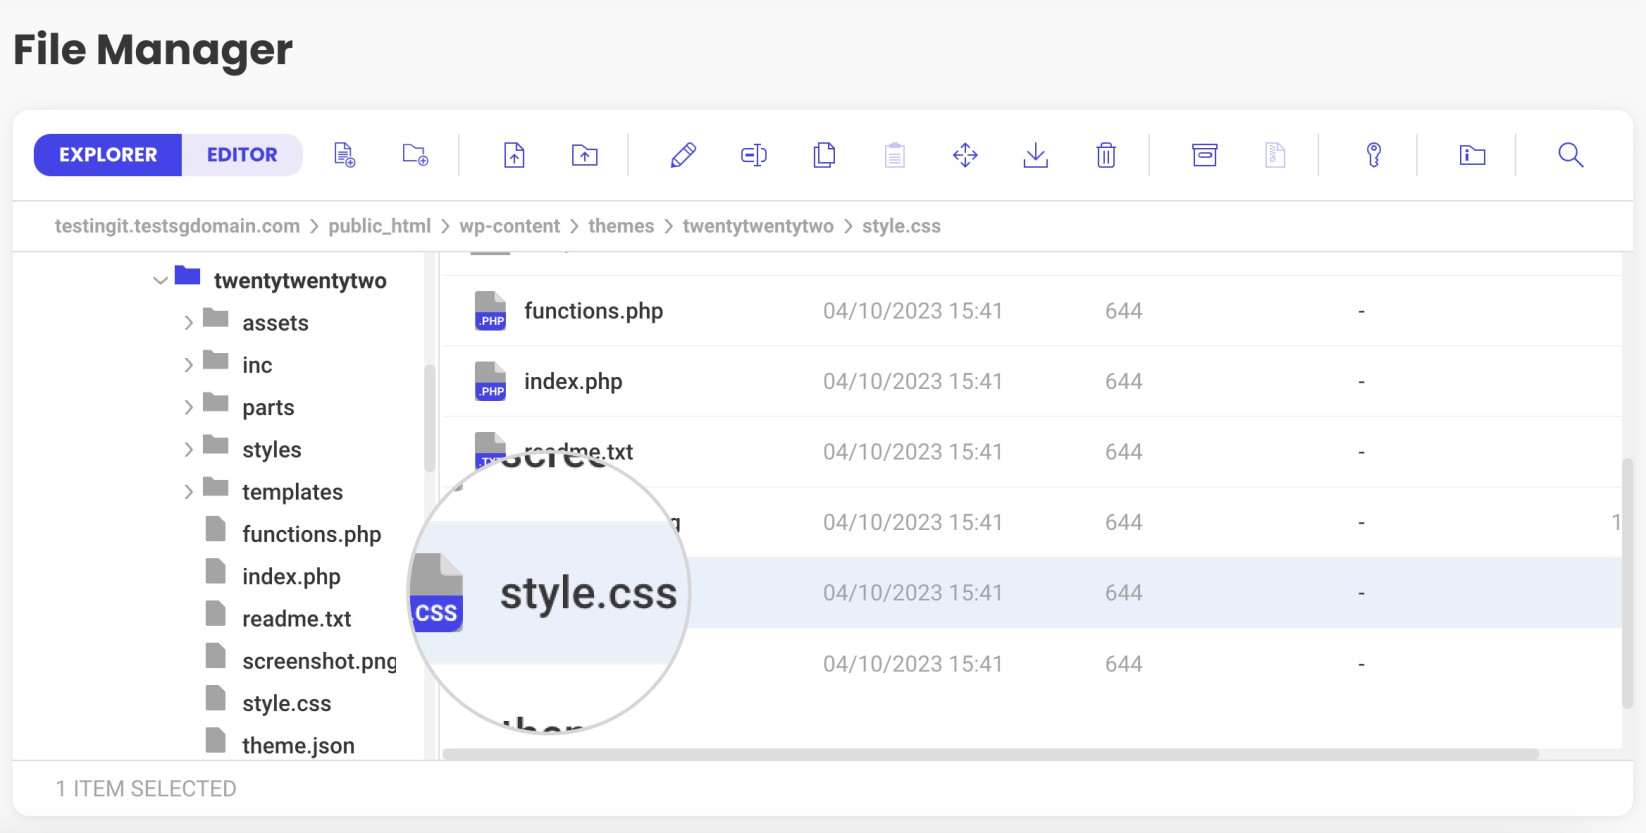 Screenshot showing how to access the style.css file of your theme via File Manager